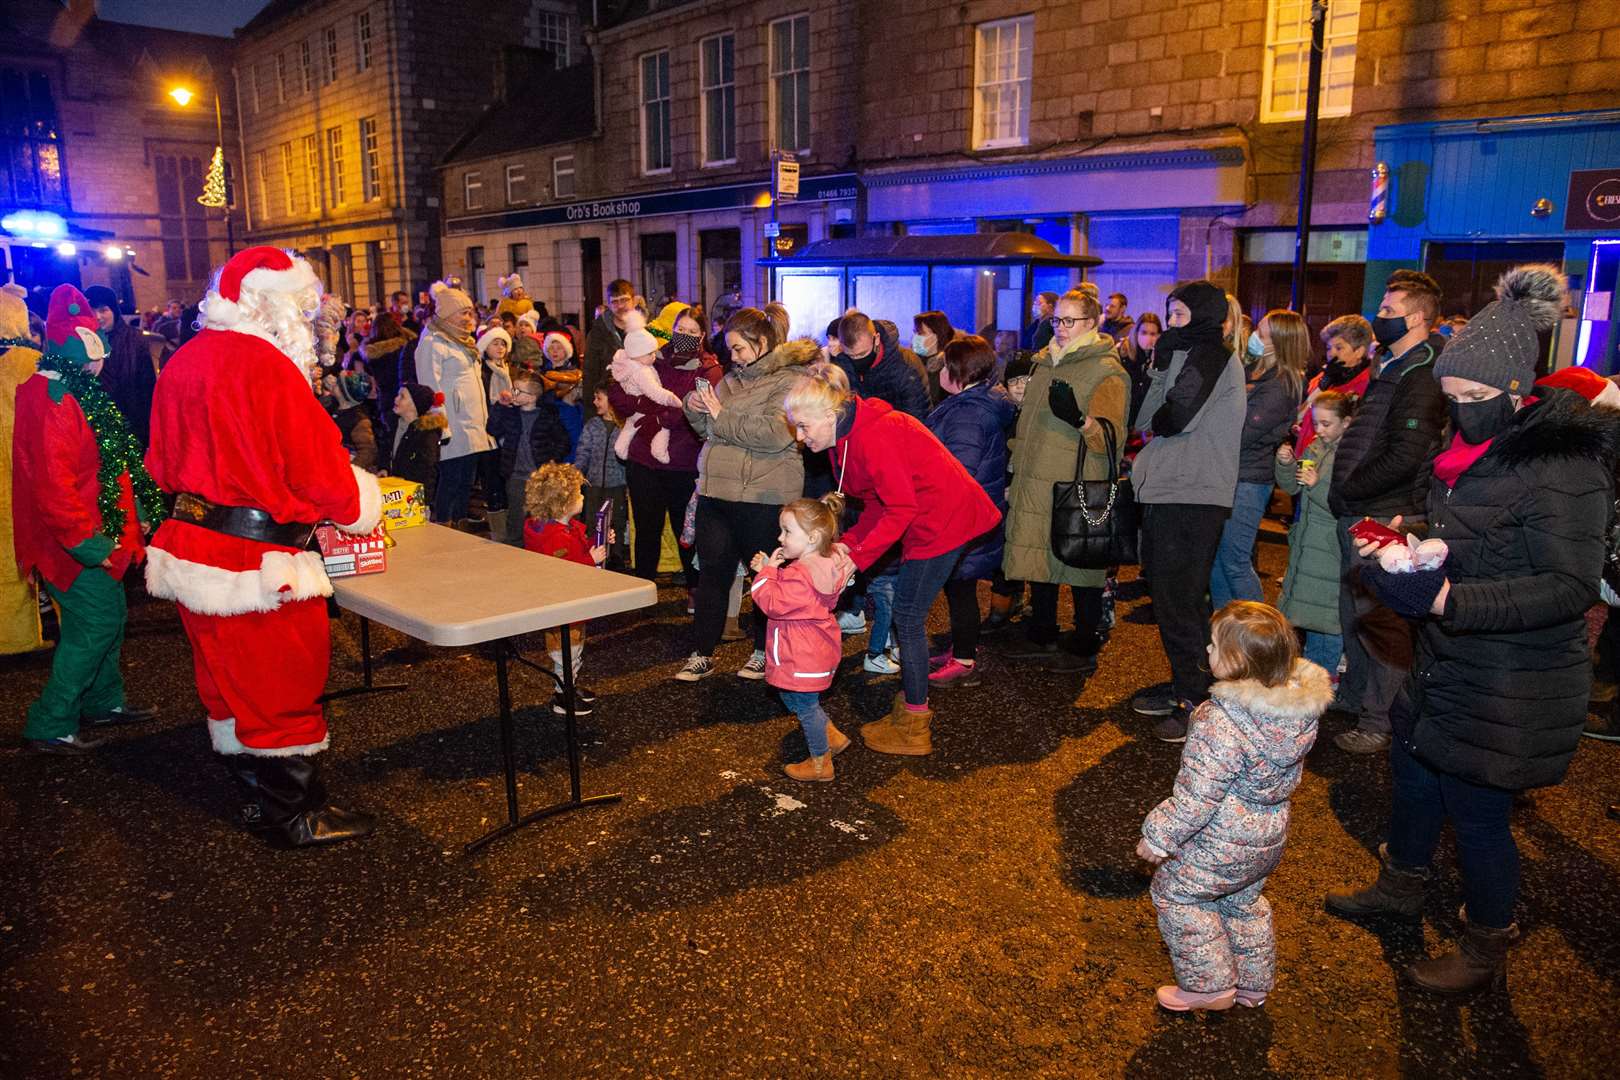 A good crowd turned out to see Santa arrive in Huntly Square. Picture: Daniel Forsyth.